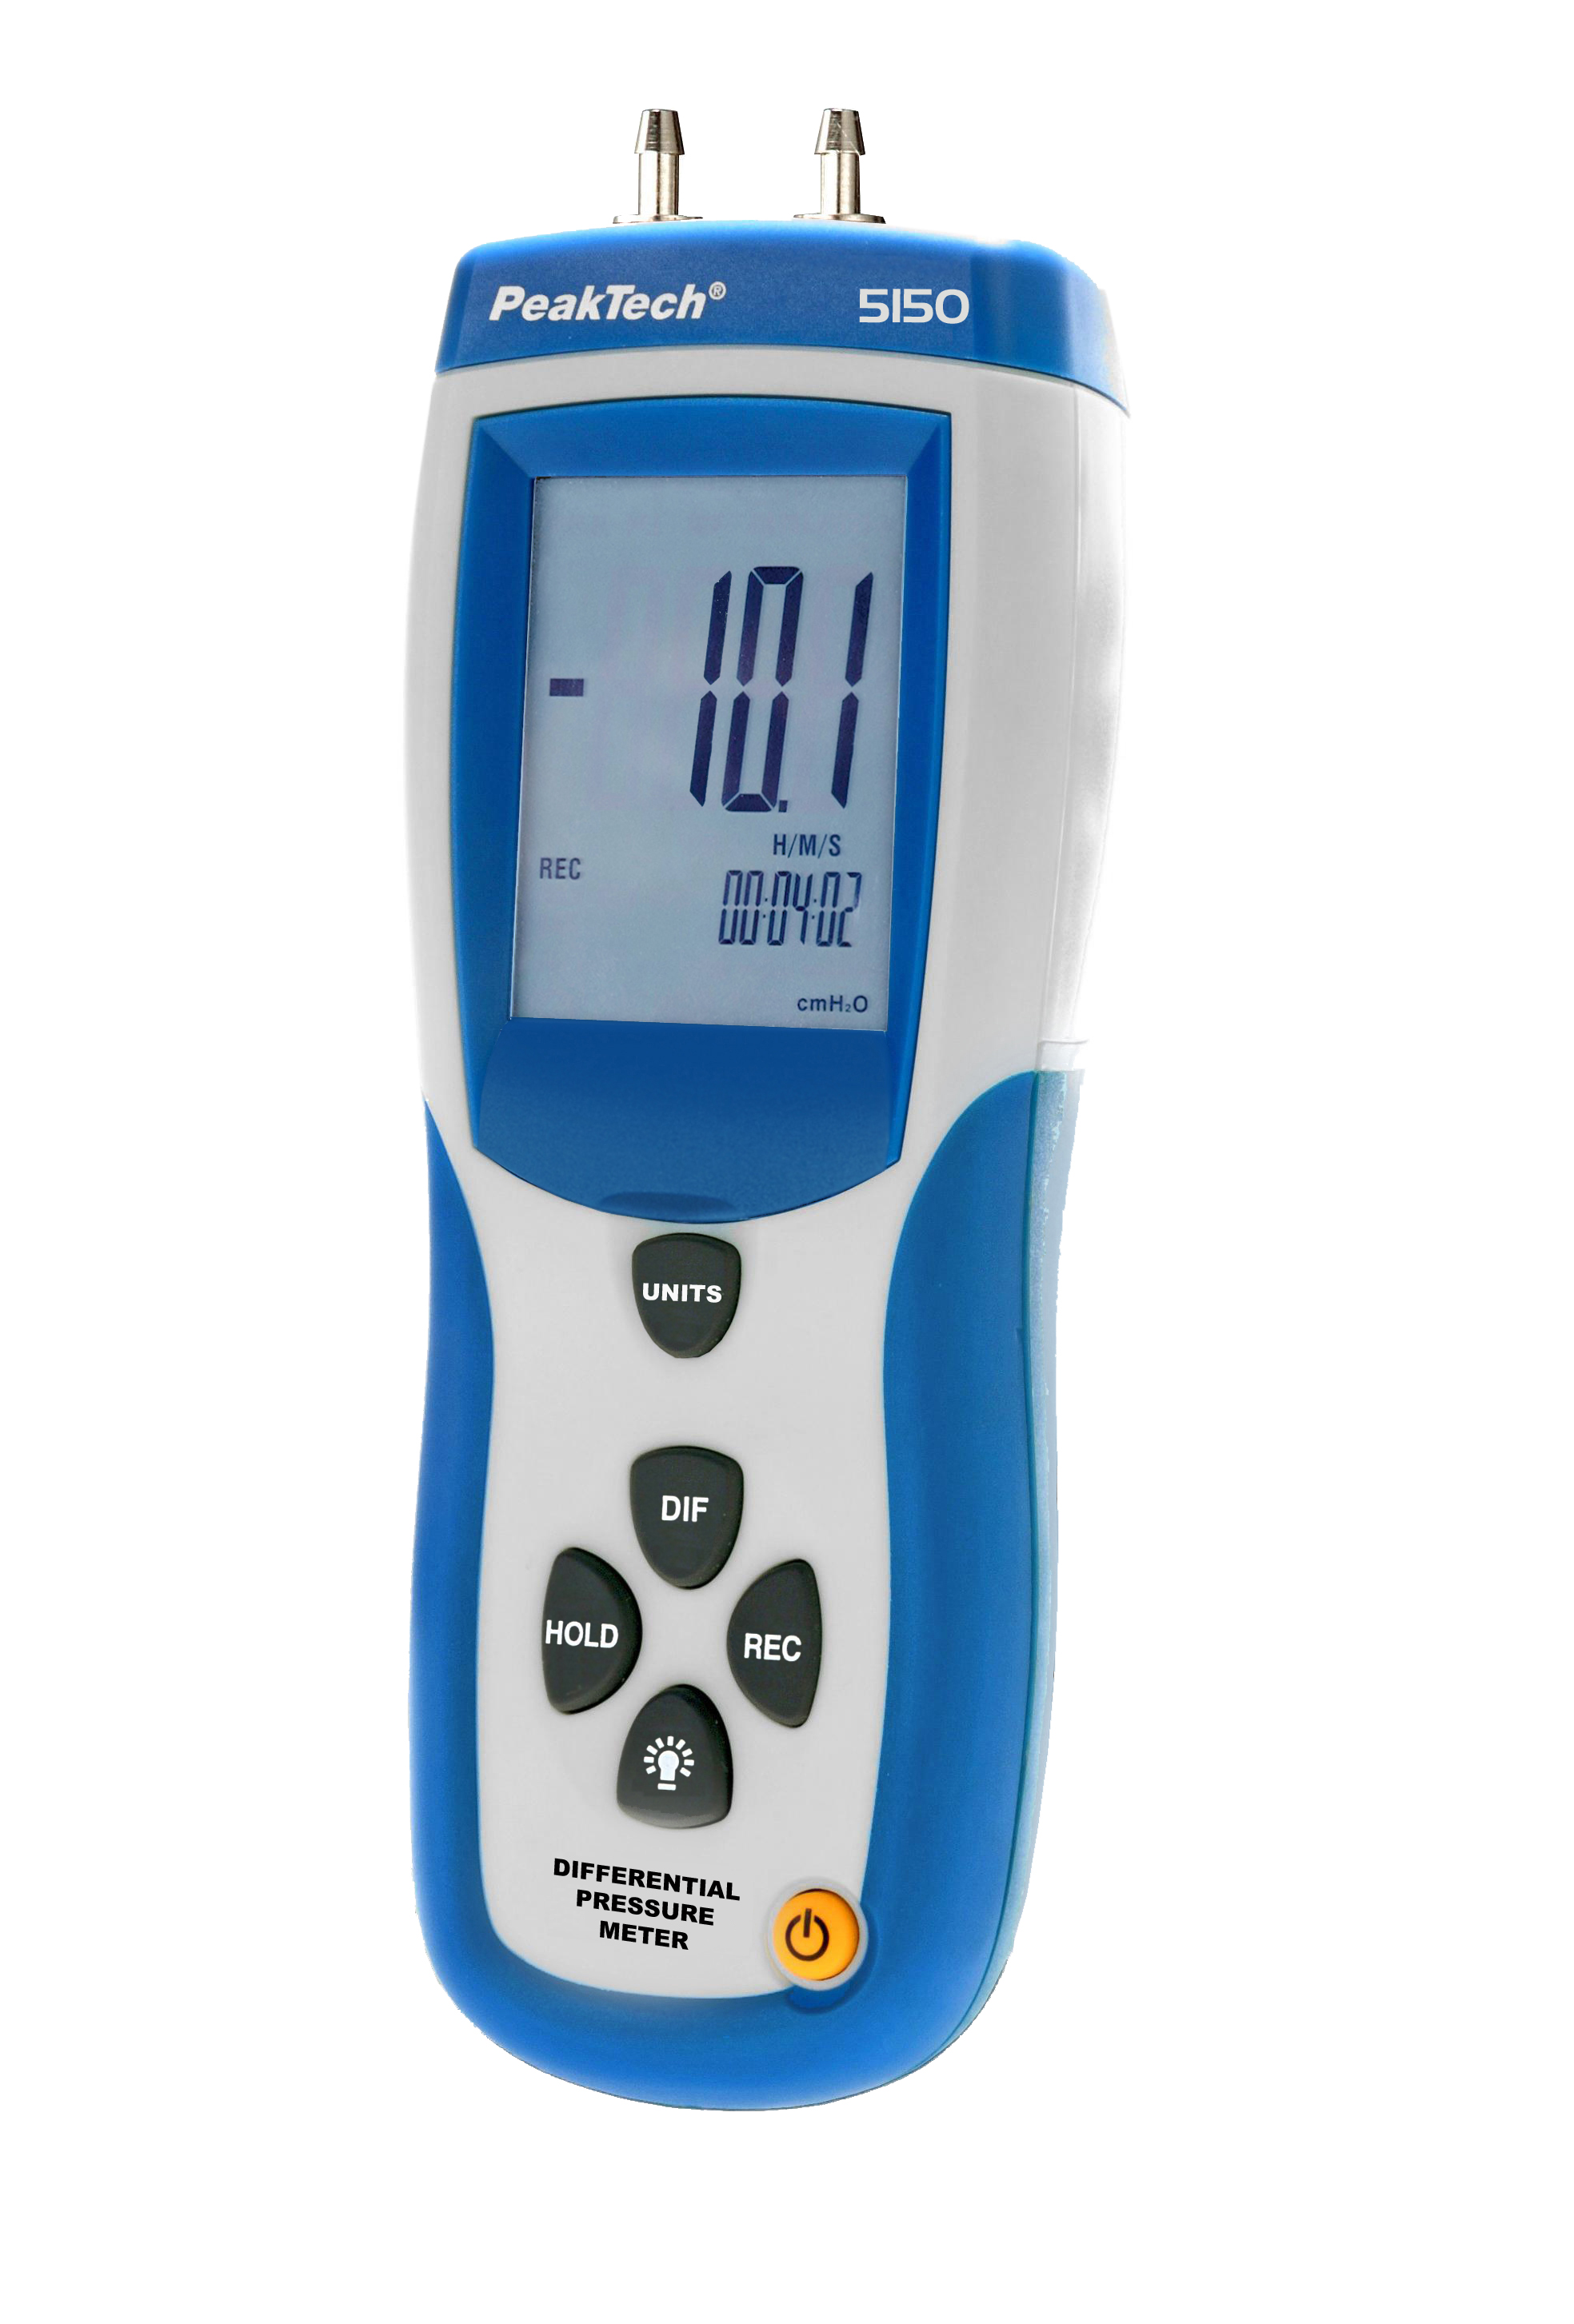 «PeakTech® P 5150» Differential Pressure Meter with USB